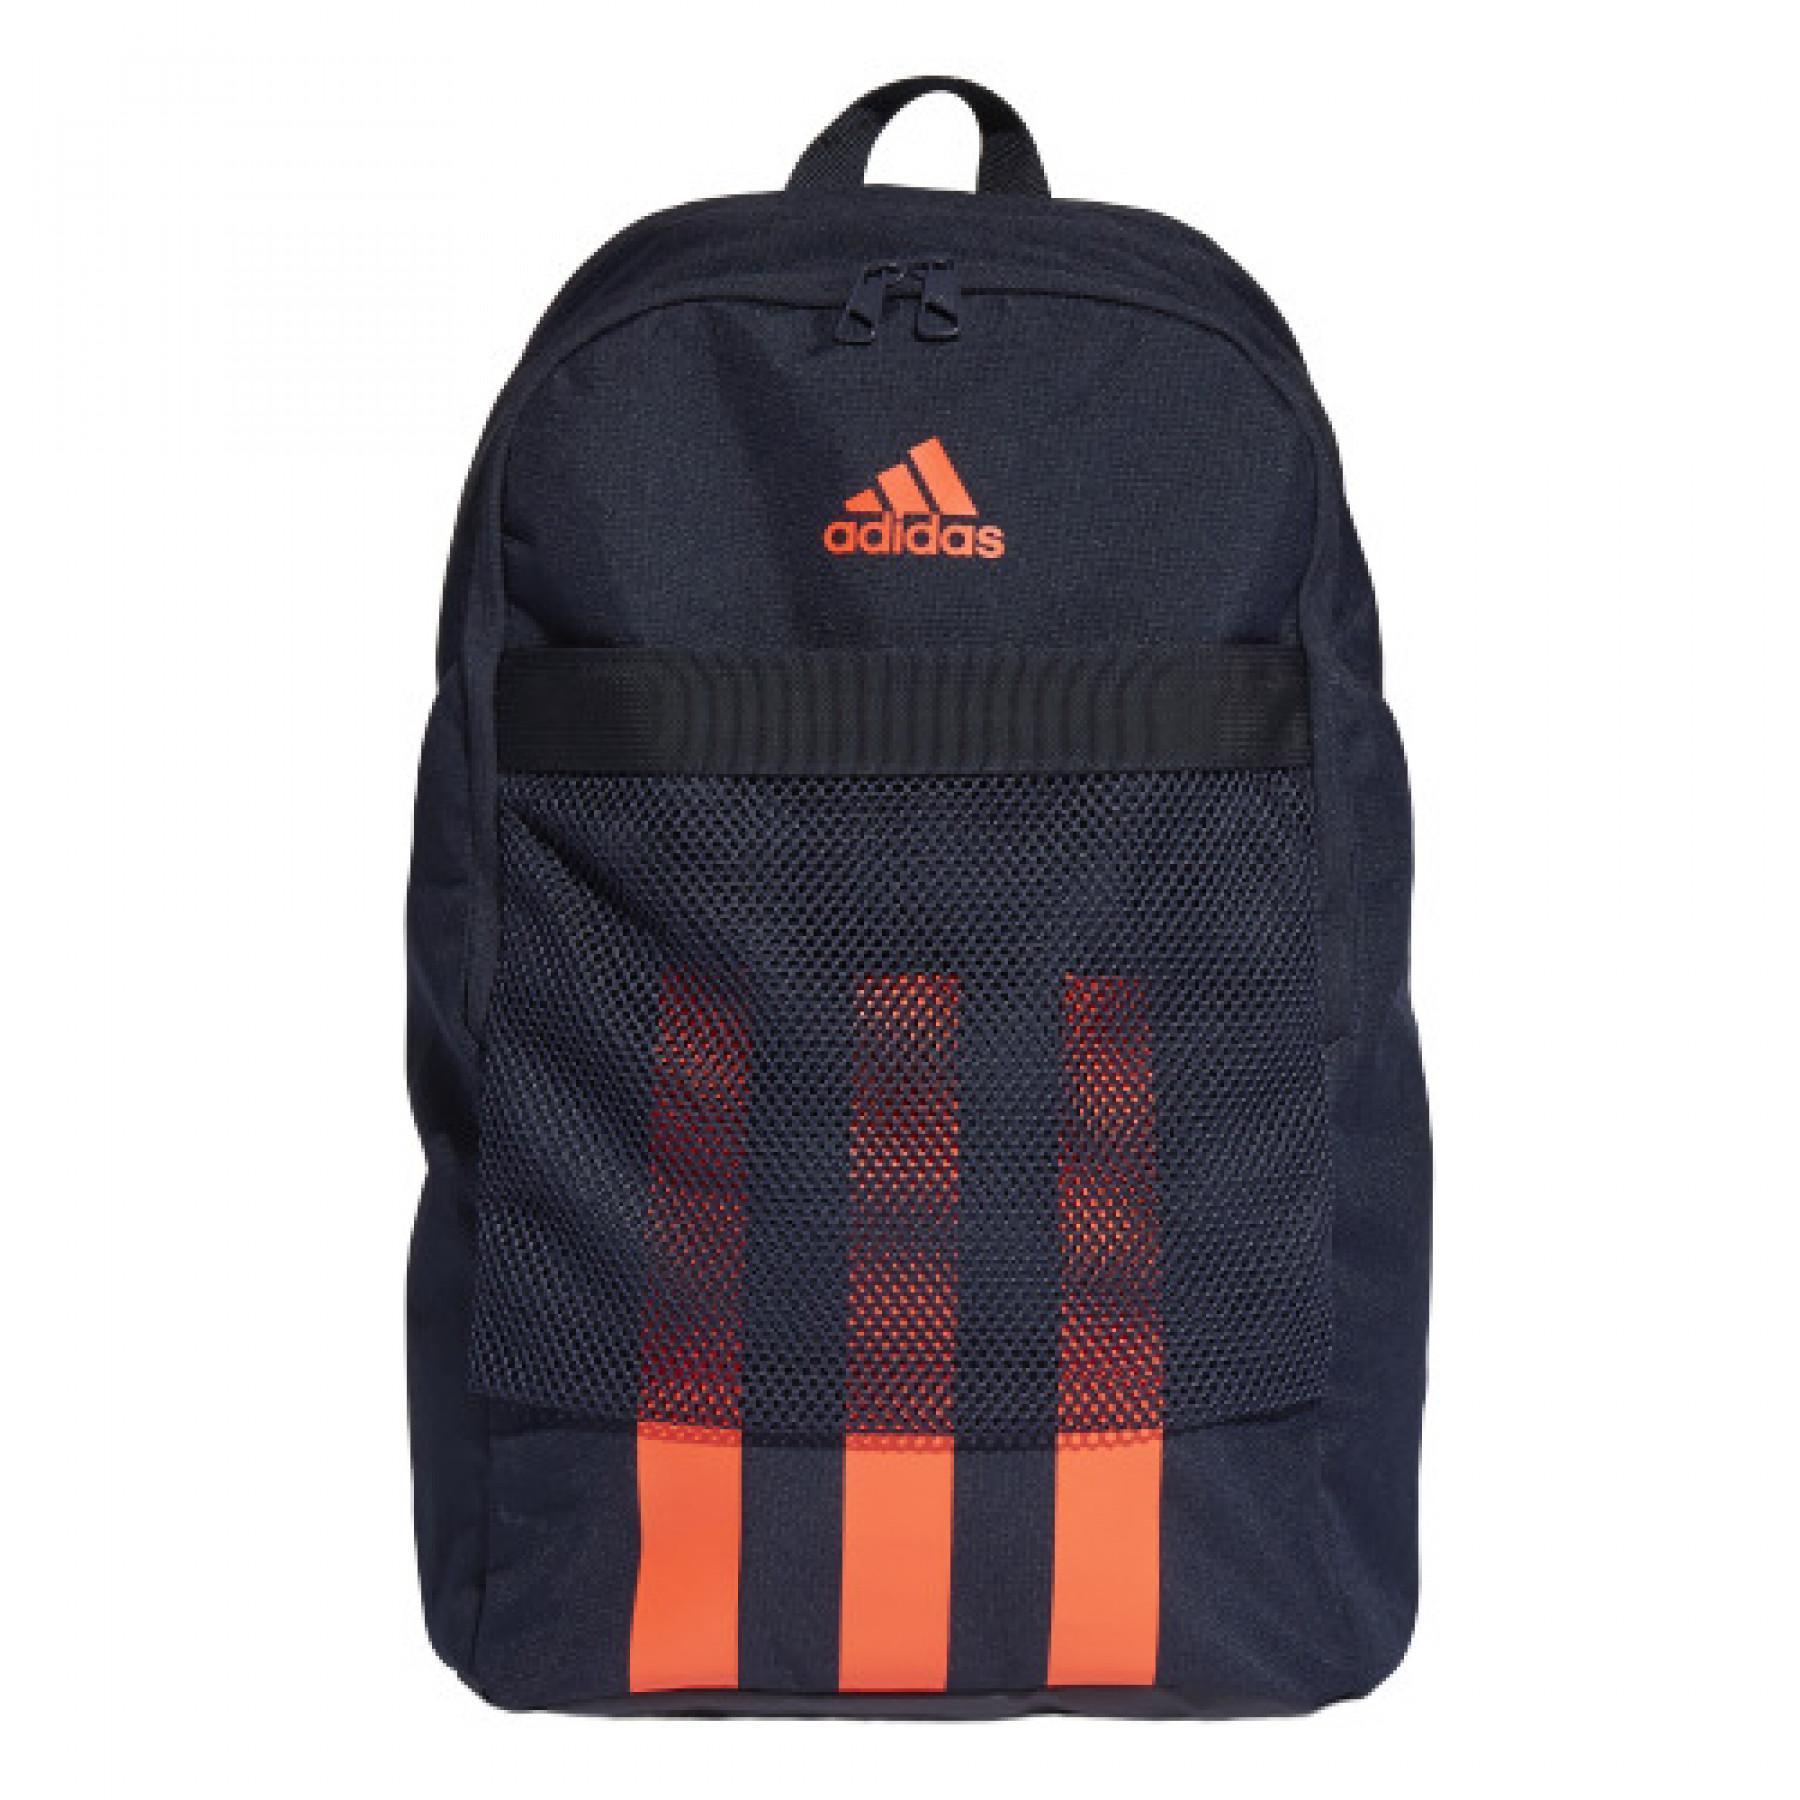 Zaino <exclude>adidas</exclude> L